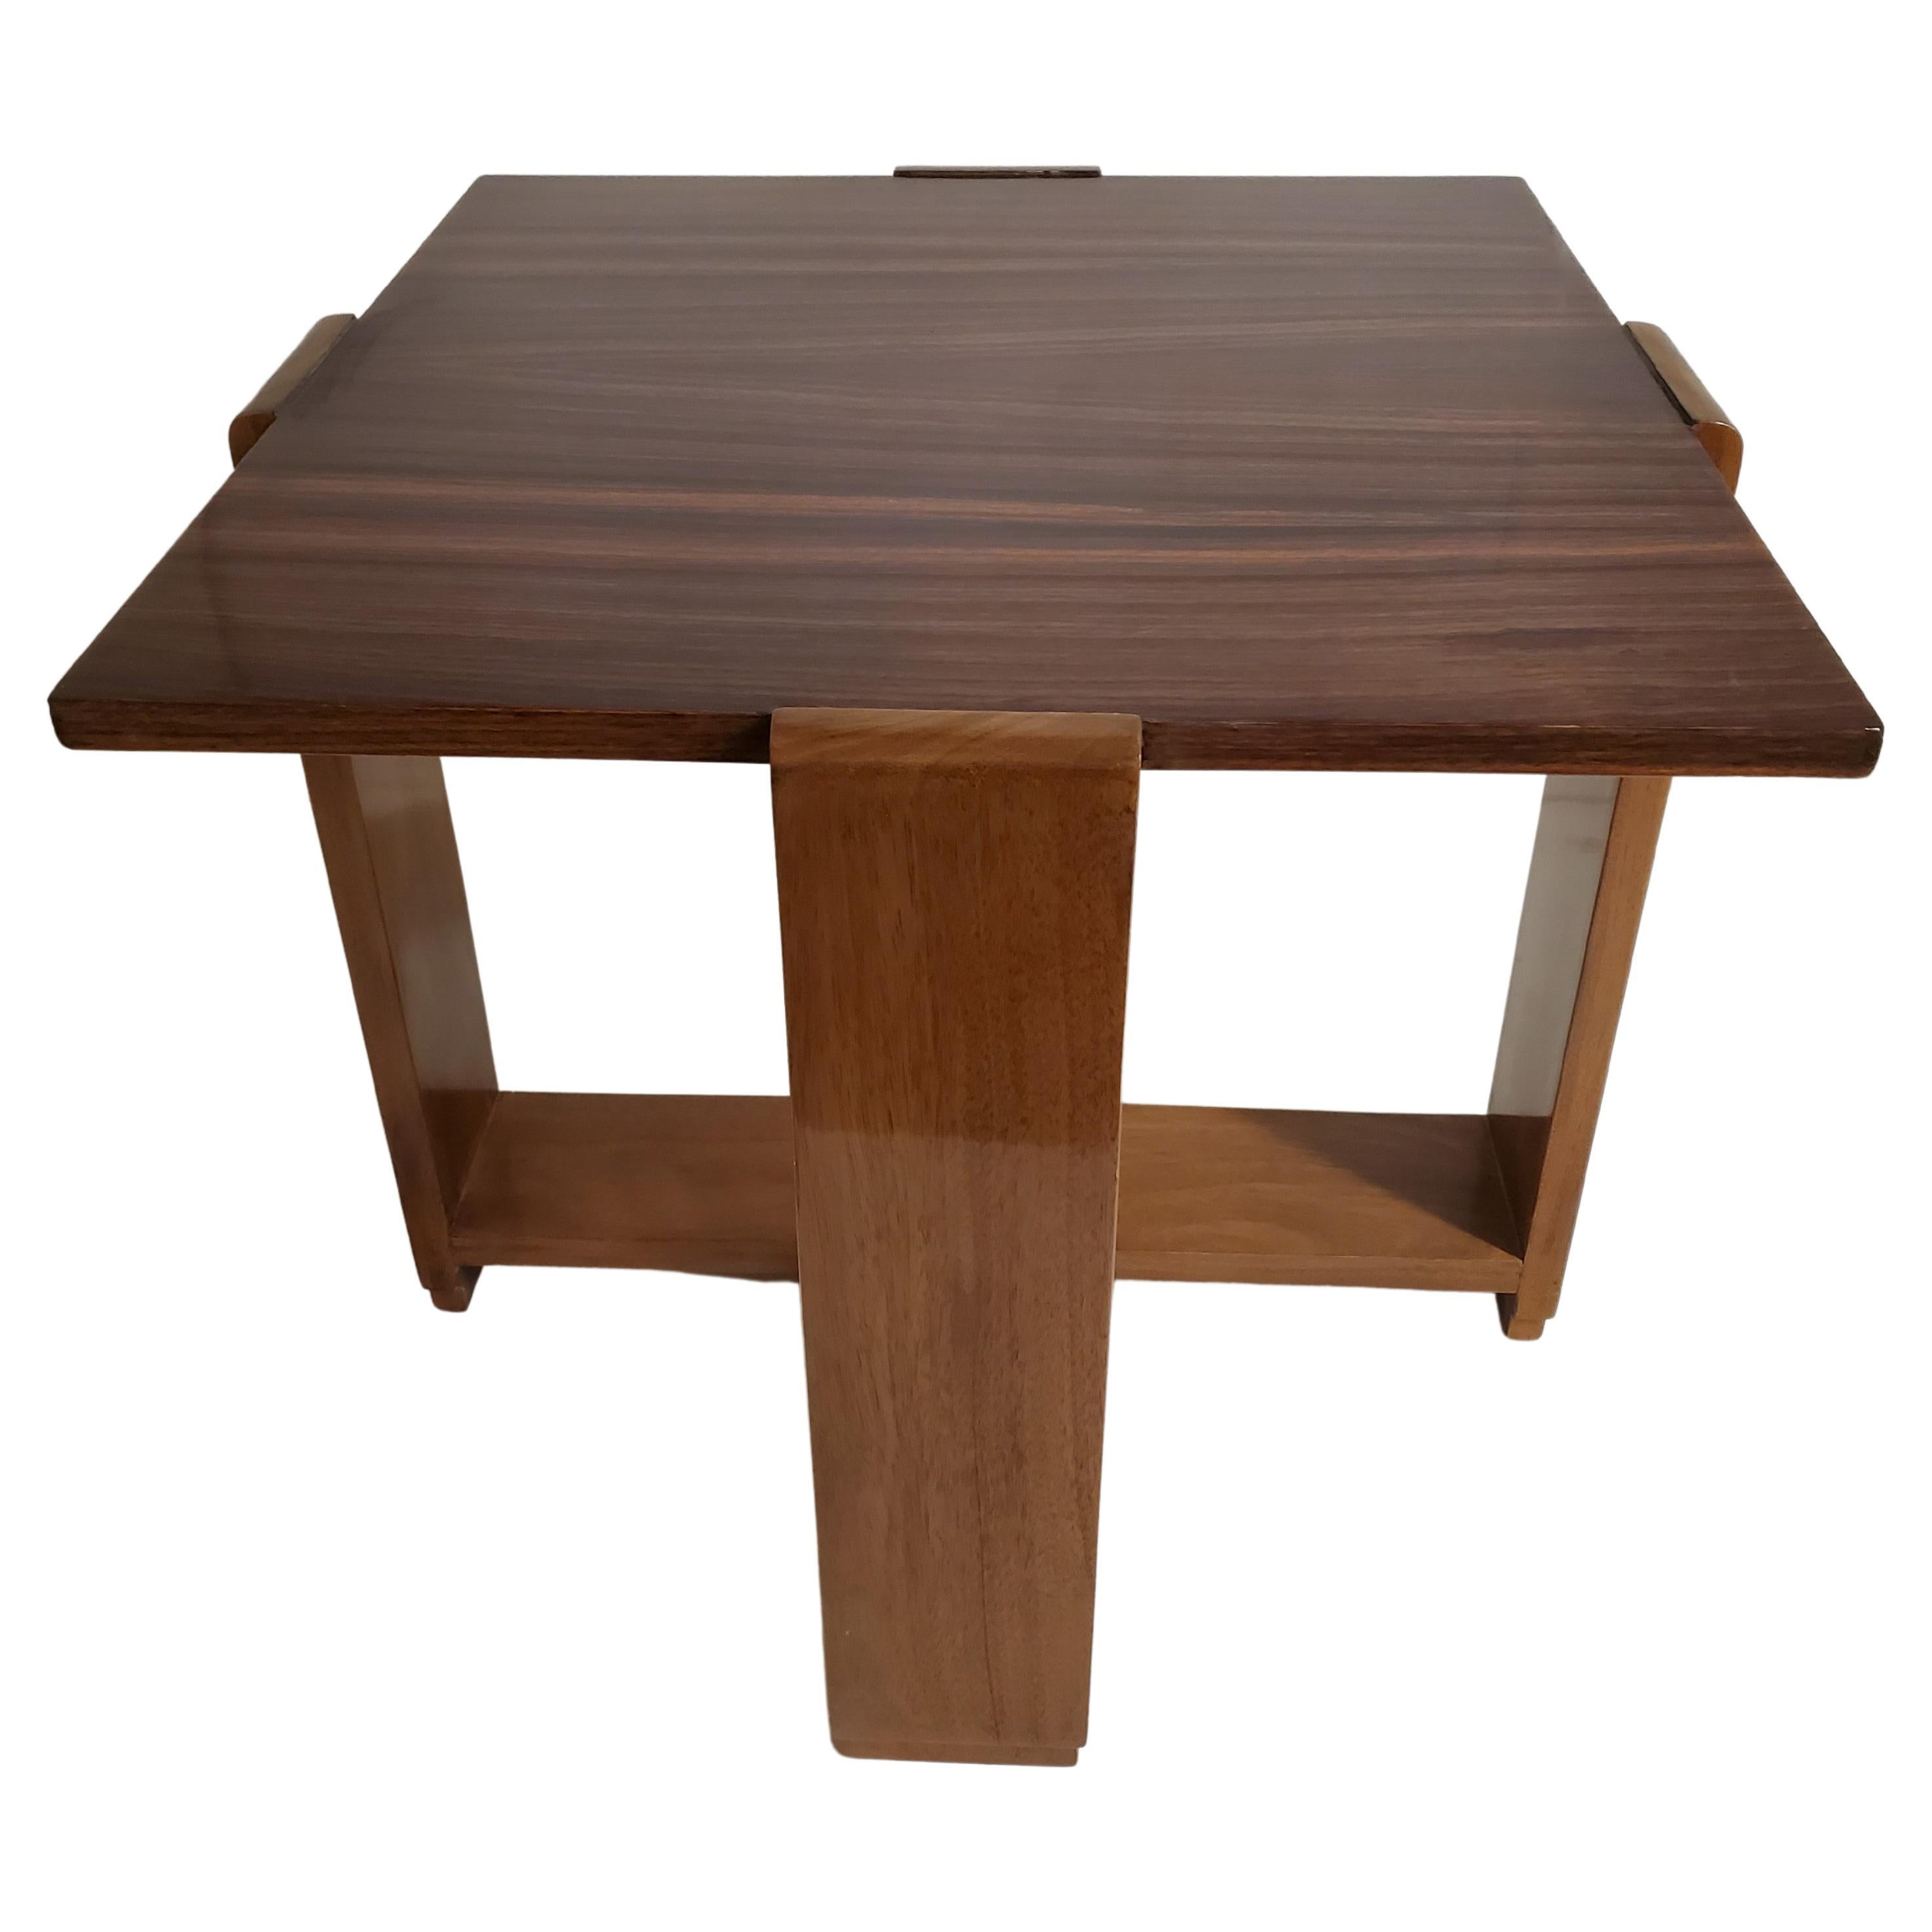 Fine French Modernist highly architectural and artistic macassar ebony square table, attributed to Michel Roux-Spitz
A fully grained macassar ebony square top is supported by four walnut slat legs ending with bullnose tops that support a wide plank